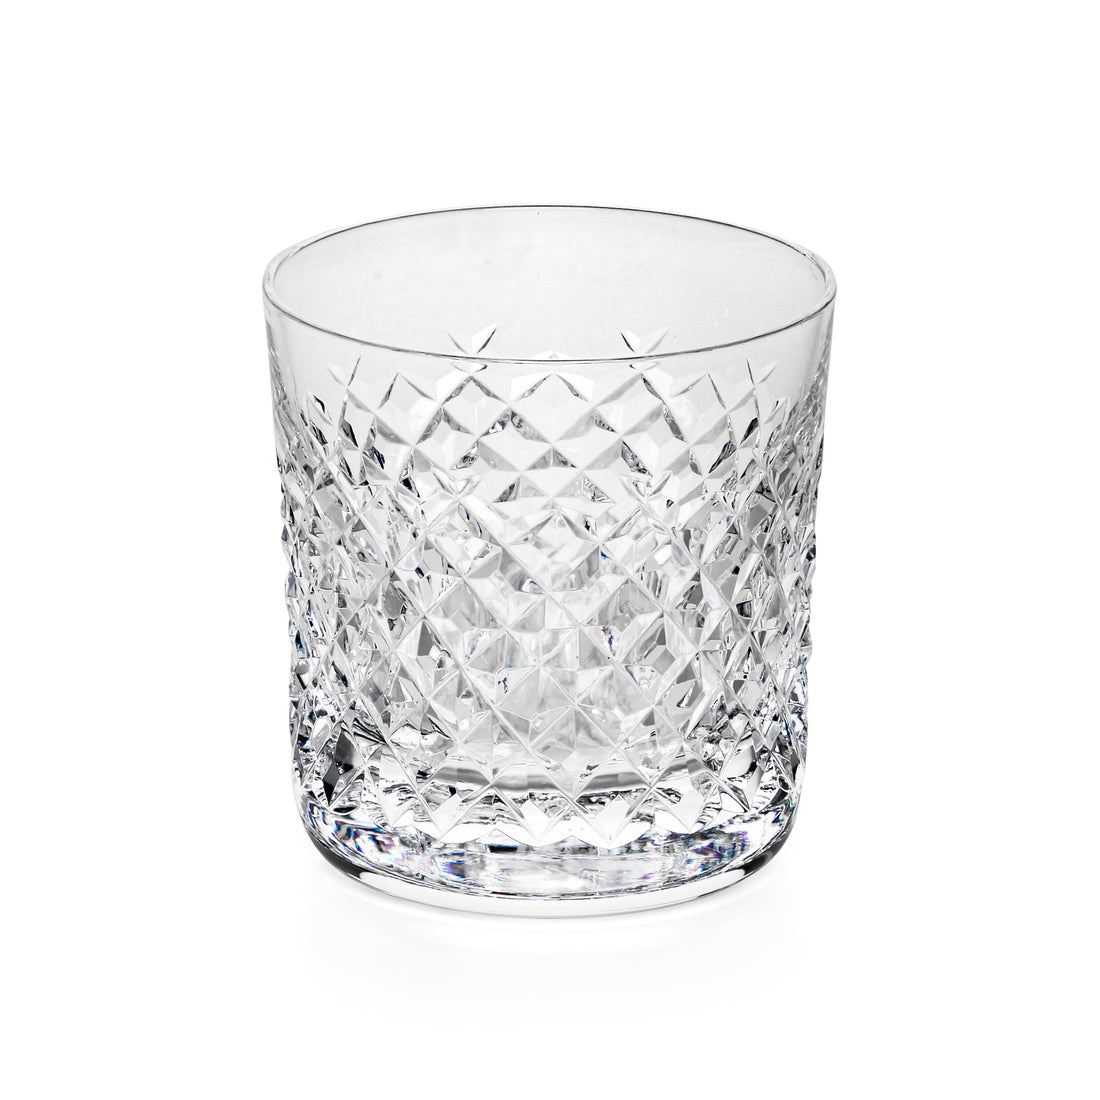 WATERFORD Alana Old Fashioned Glasses - Set of 6